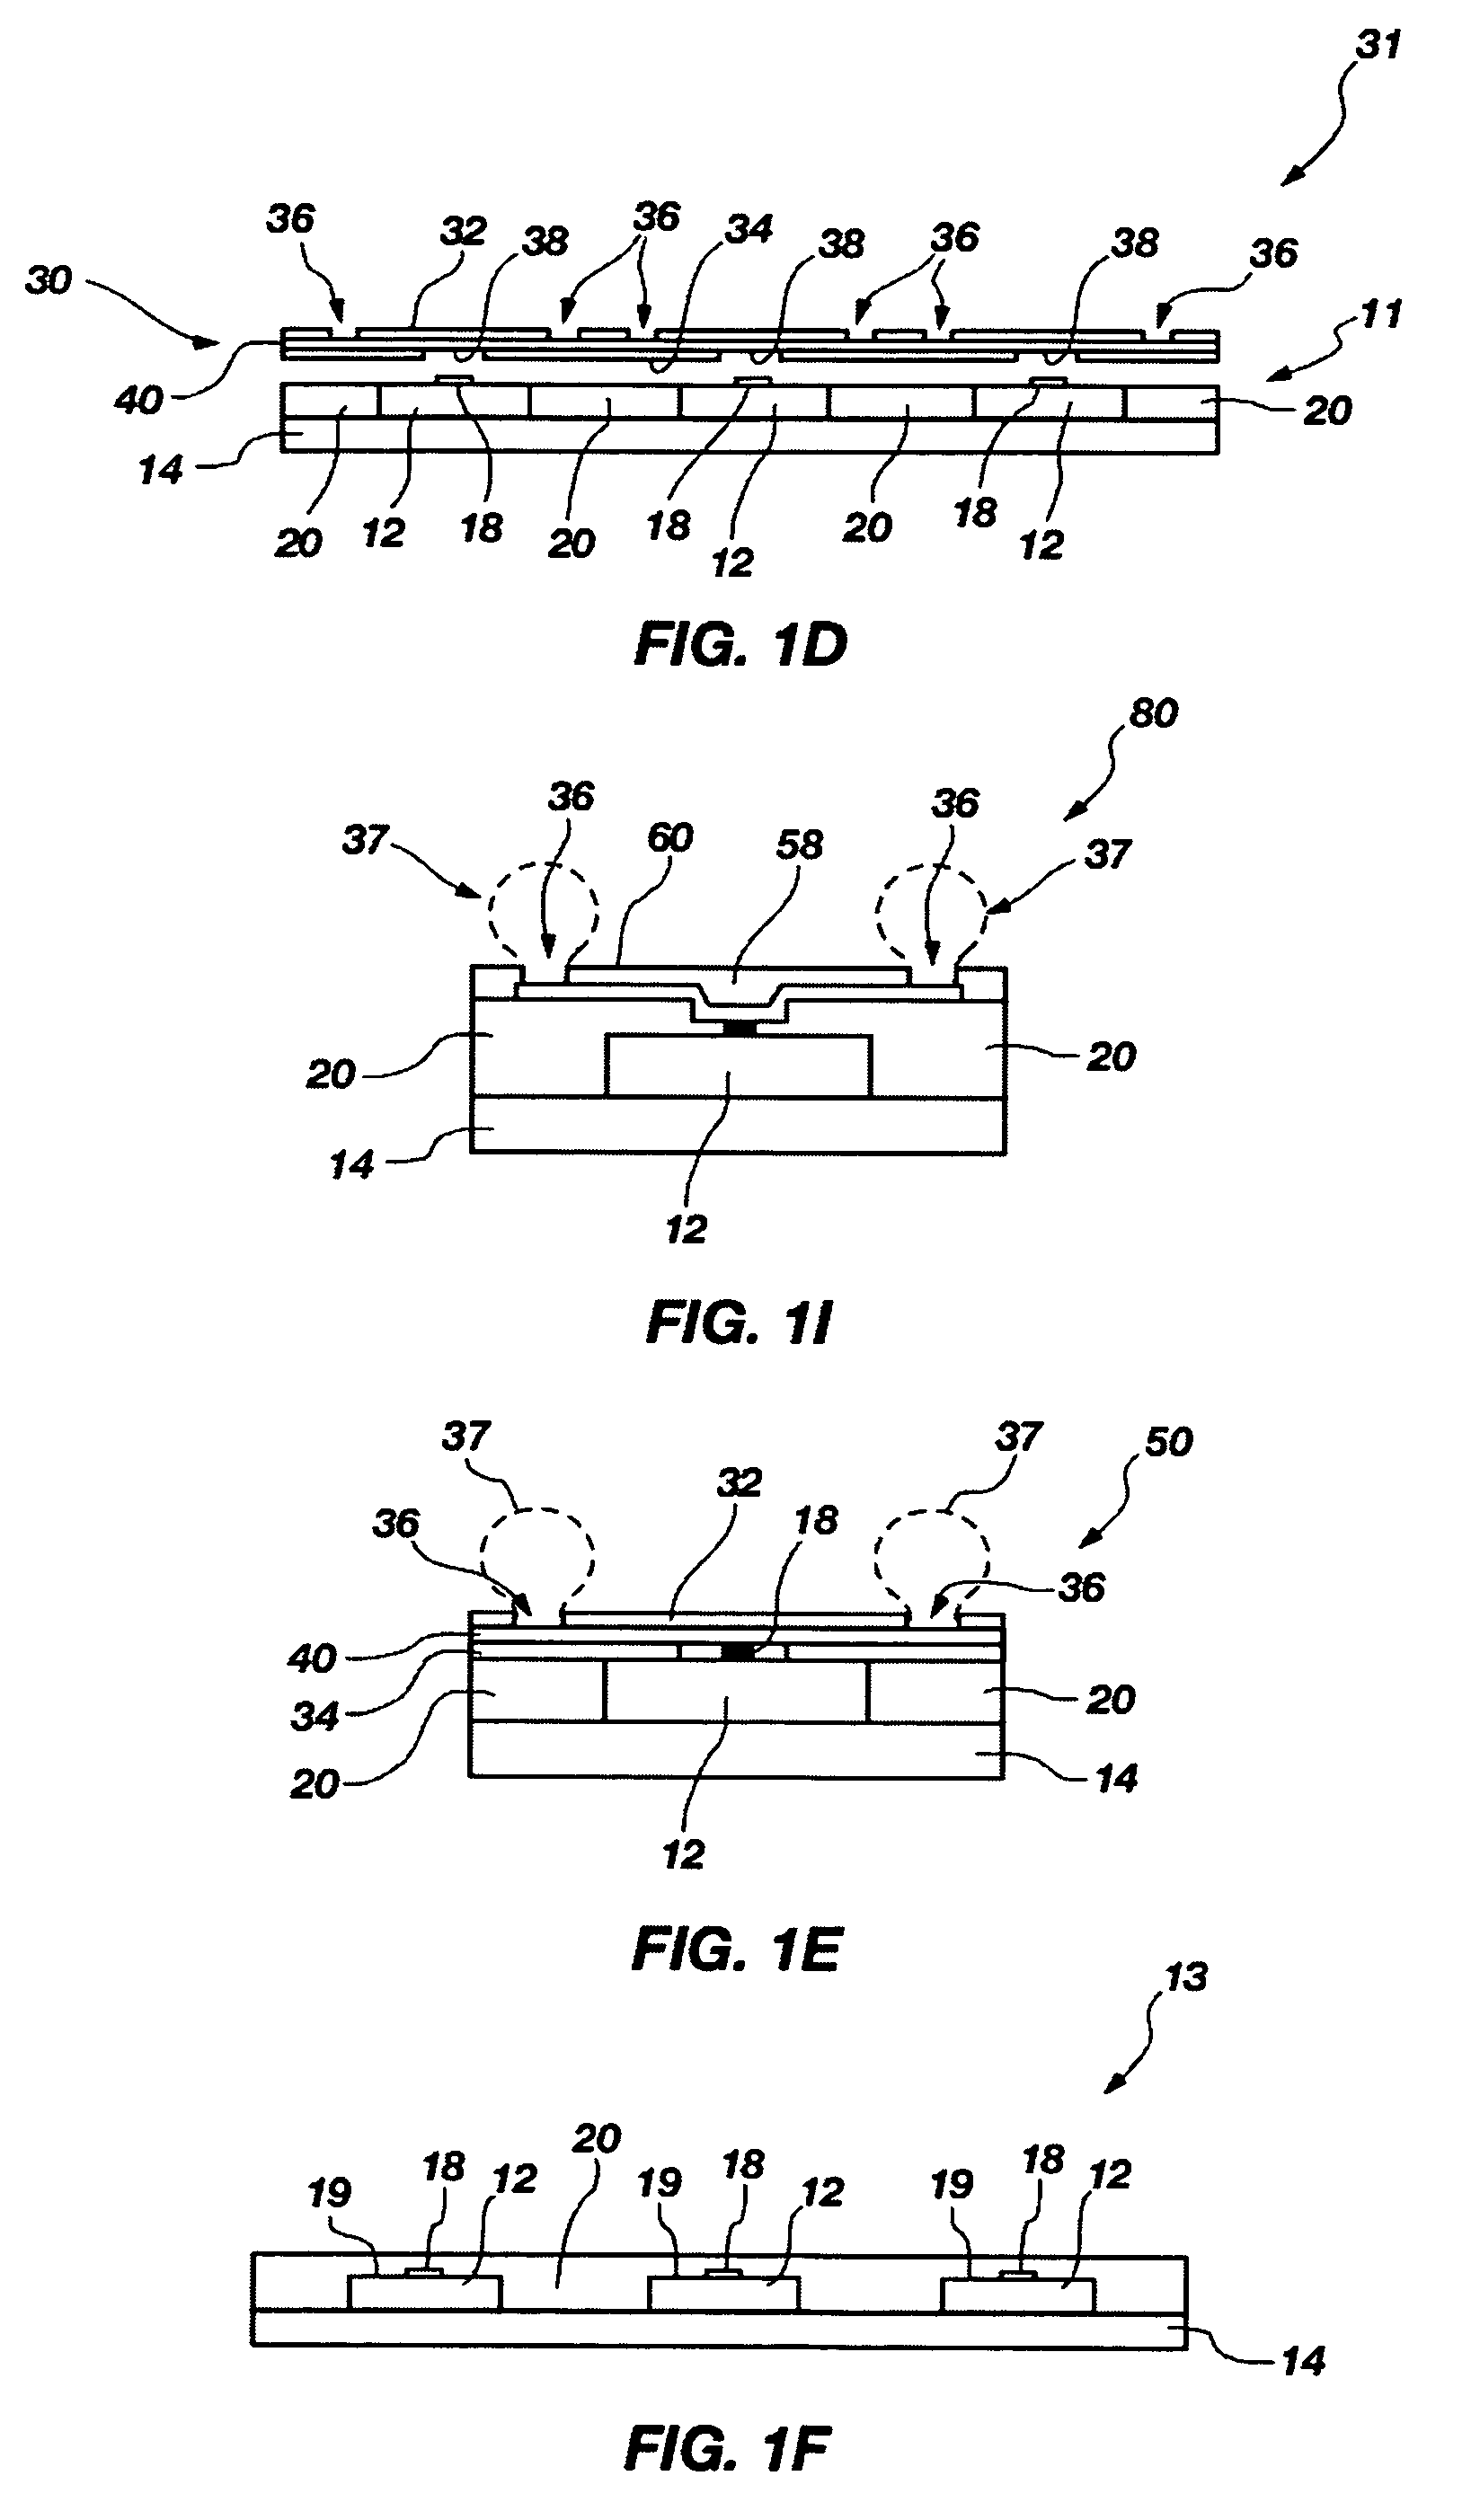 Die package, conductive element, semiconductor device including same, microlens, system including same, and methods of manufacture